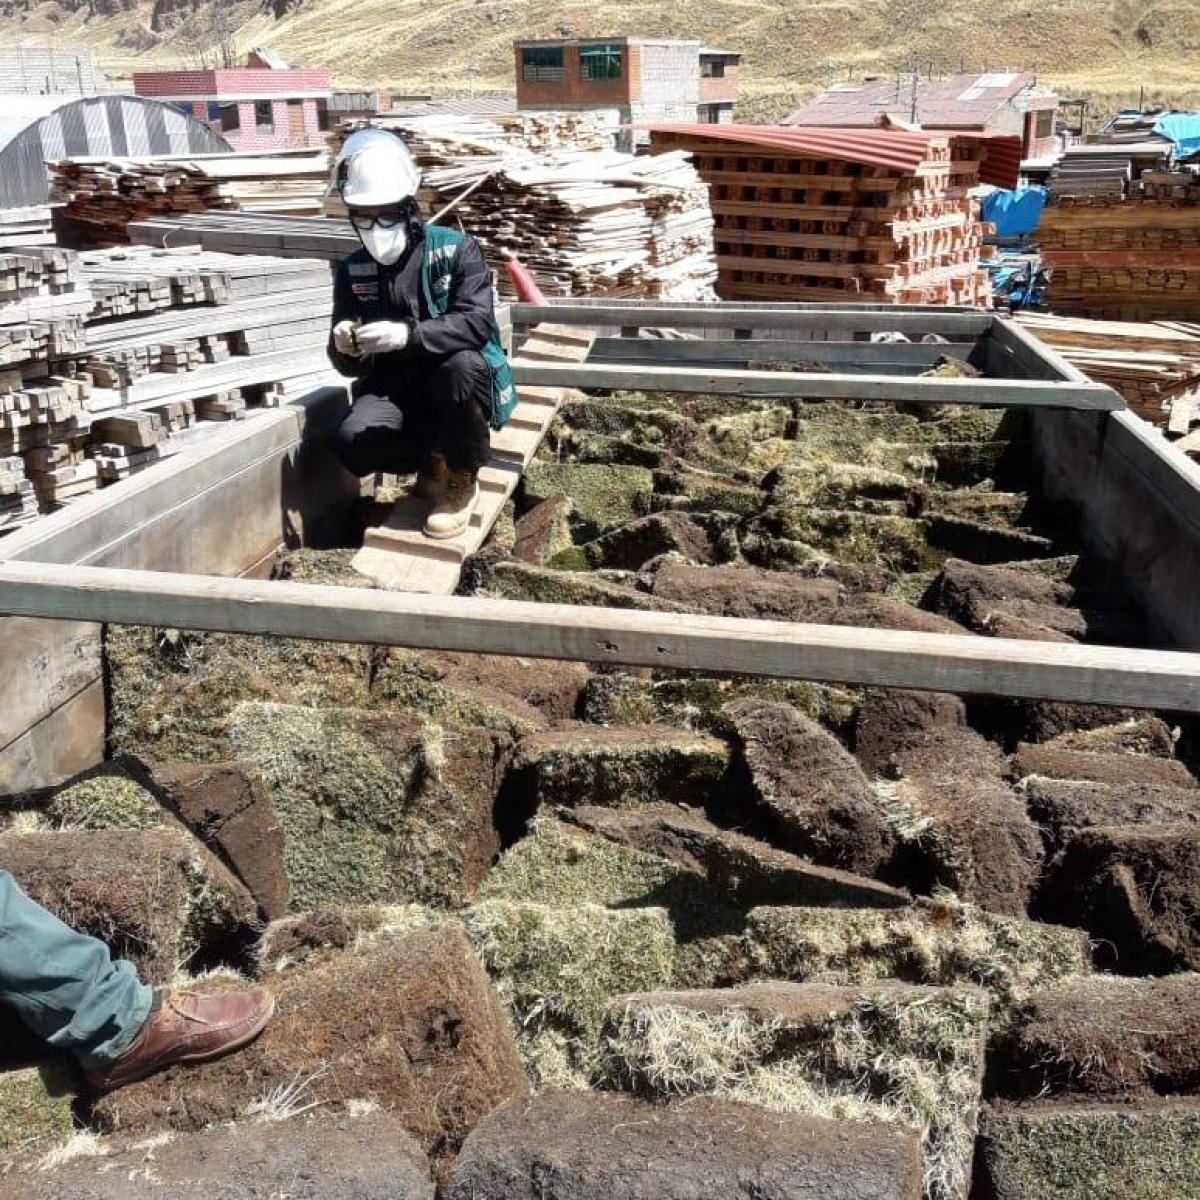 Truck seized by the Peruvian Police for illegally moving peat cushions from the wetlands